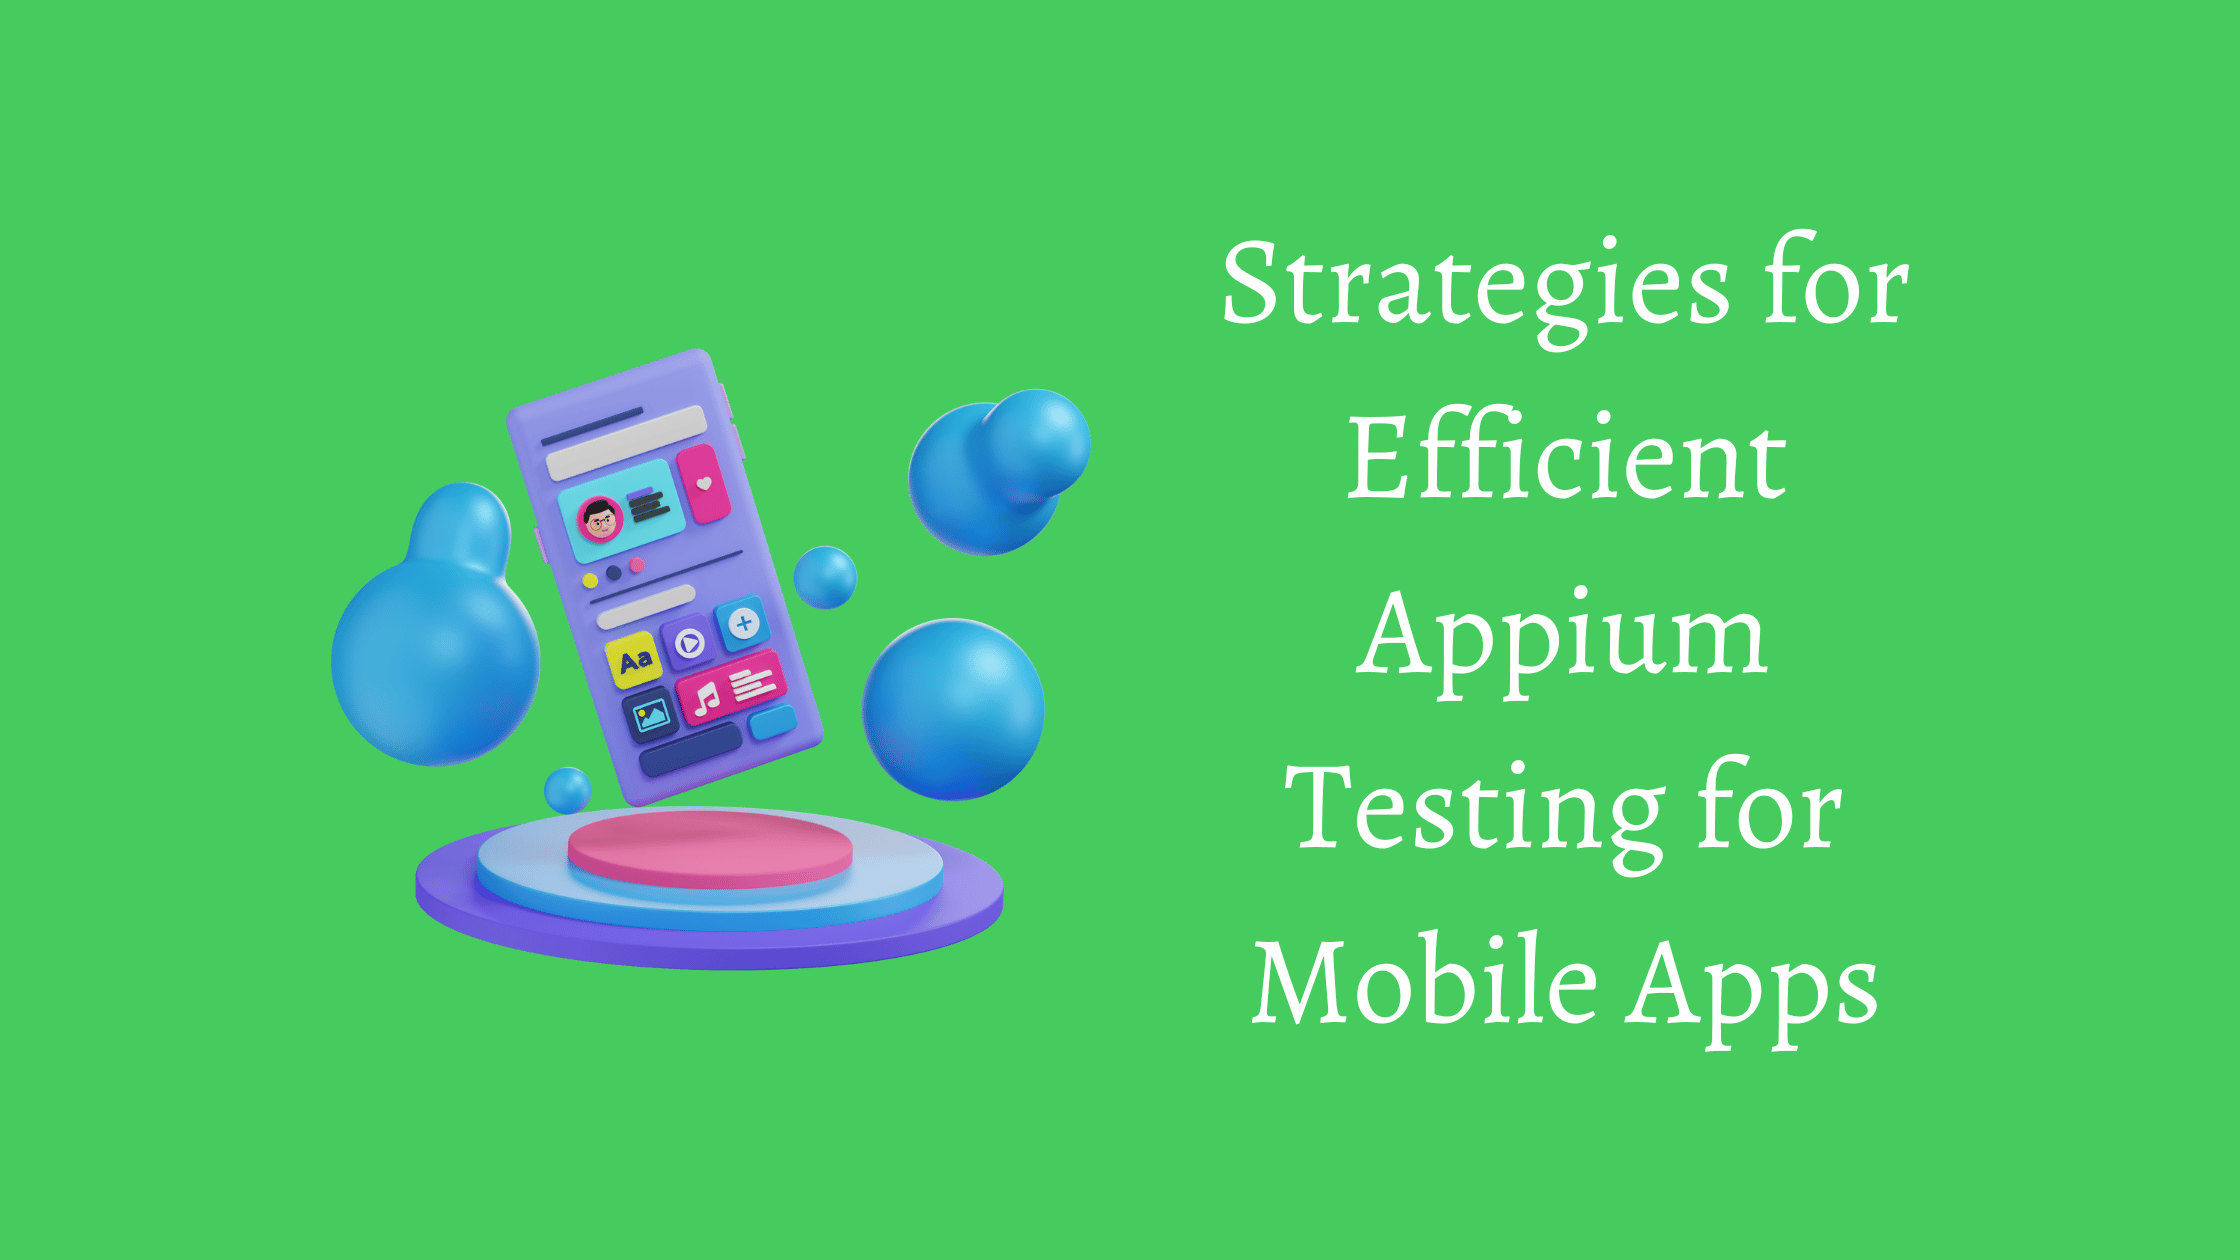 Strategies for Efficient Appium Testing for Mobile Apps